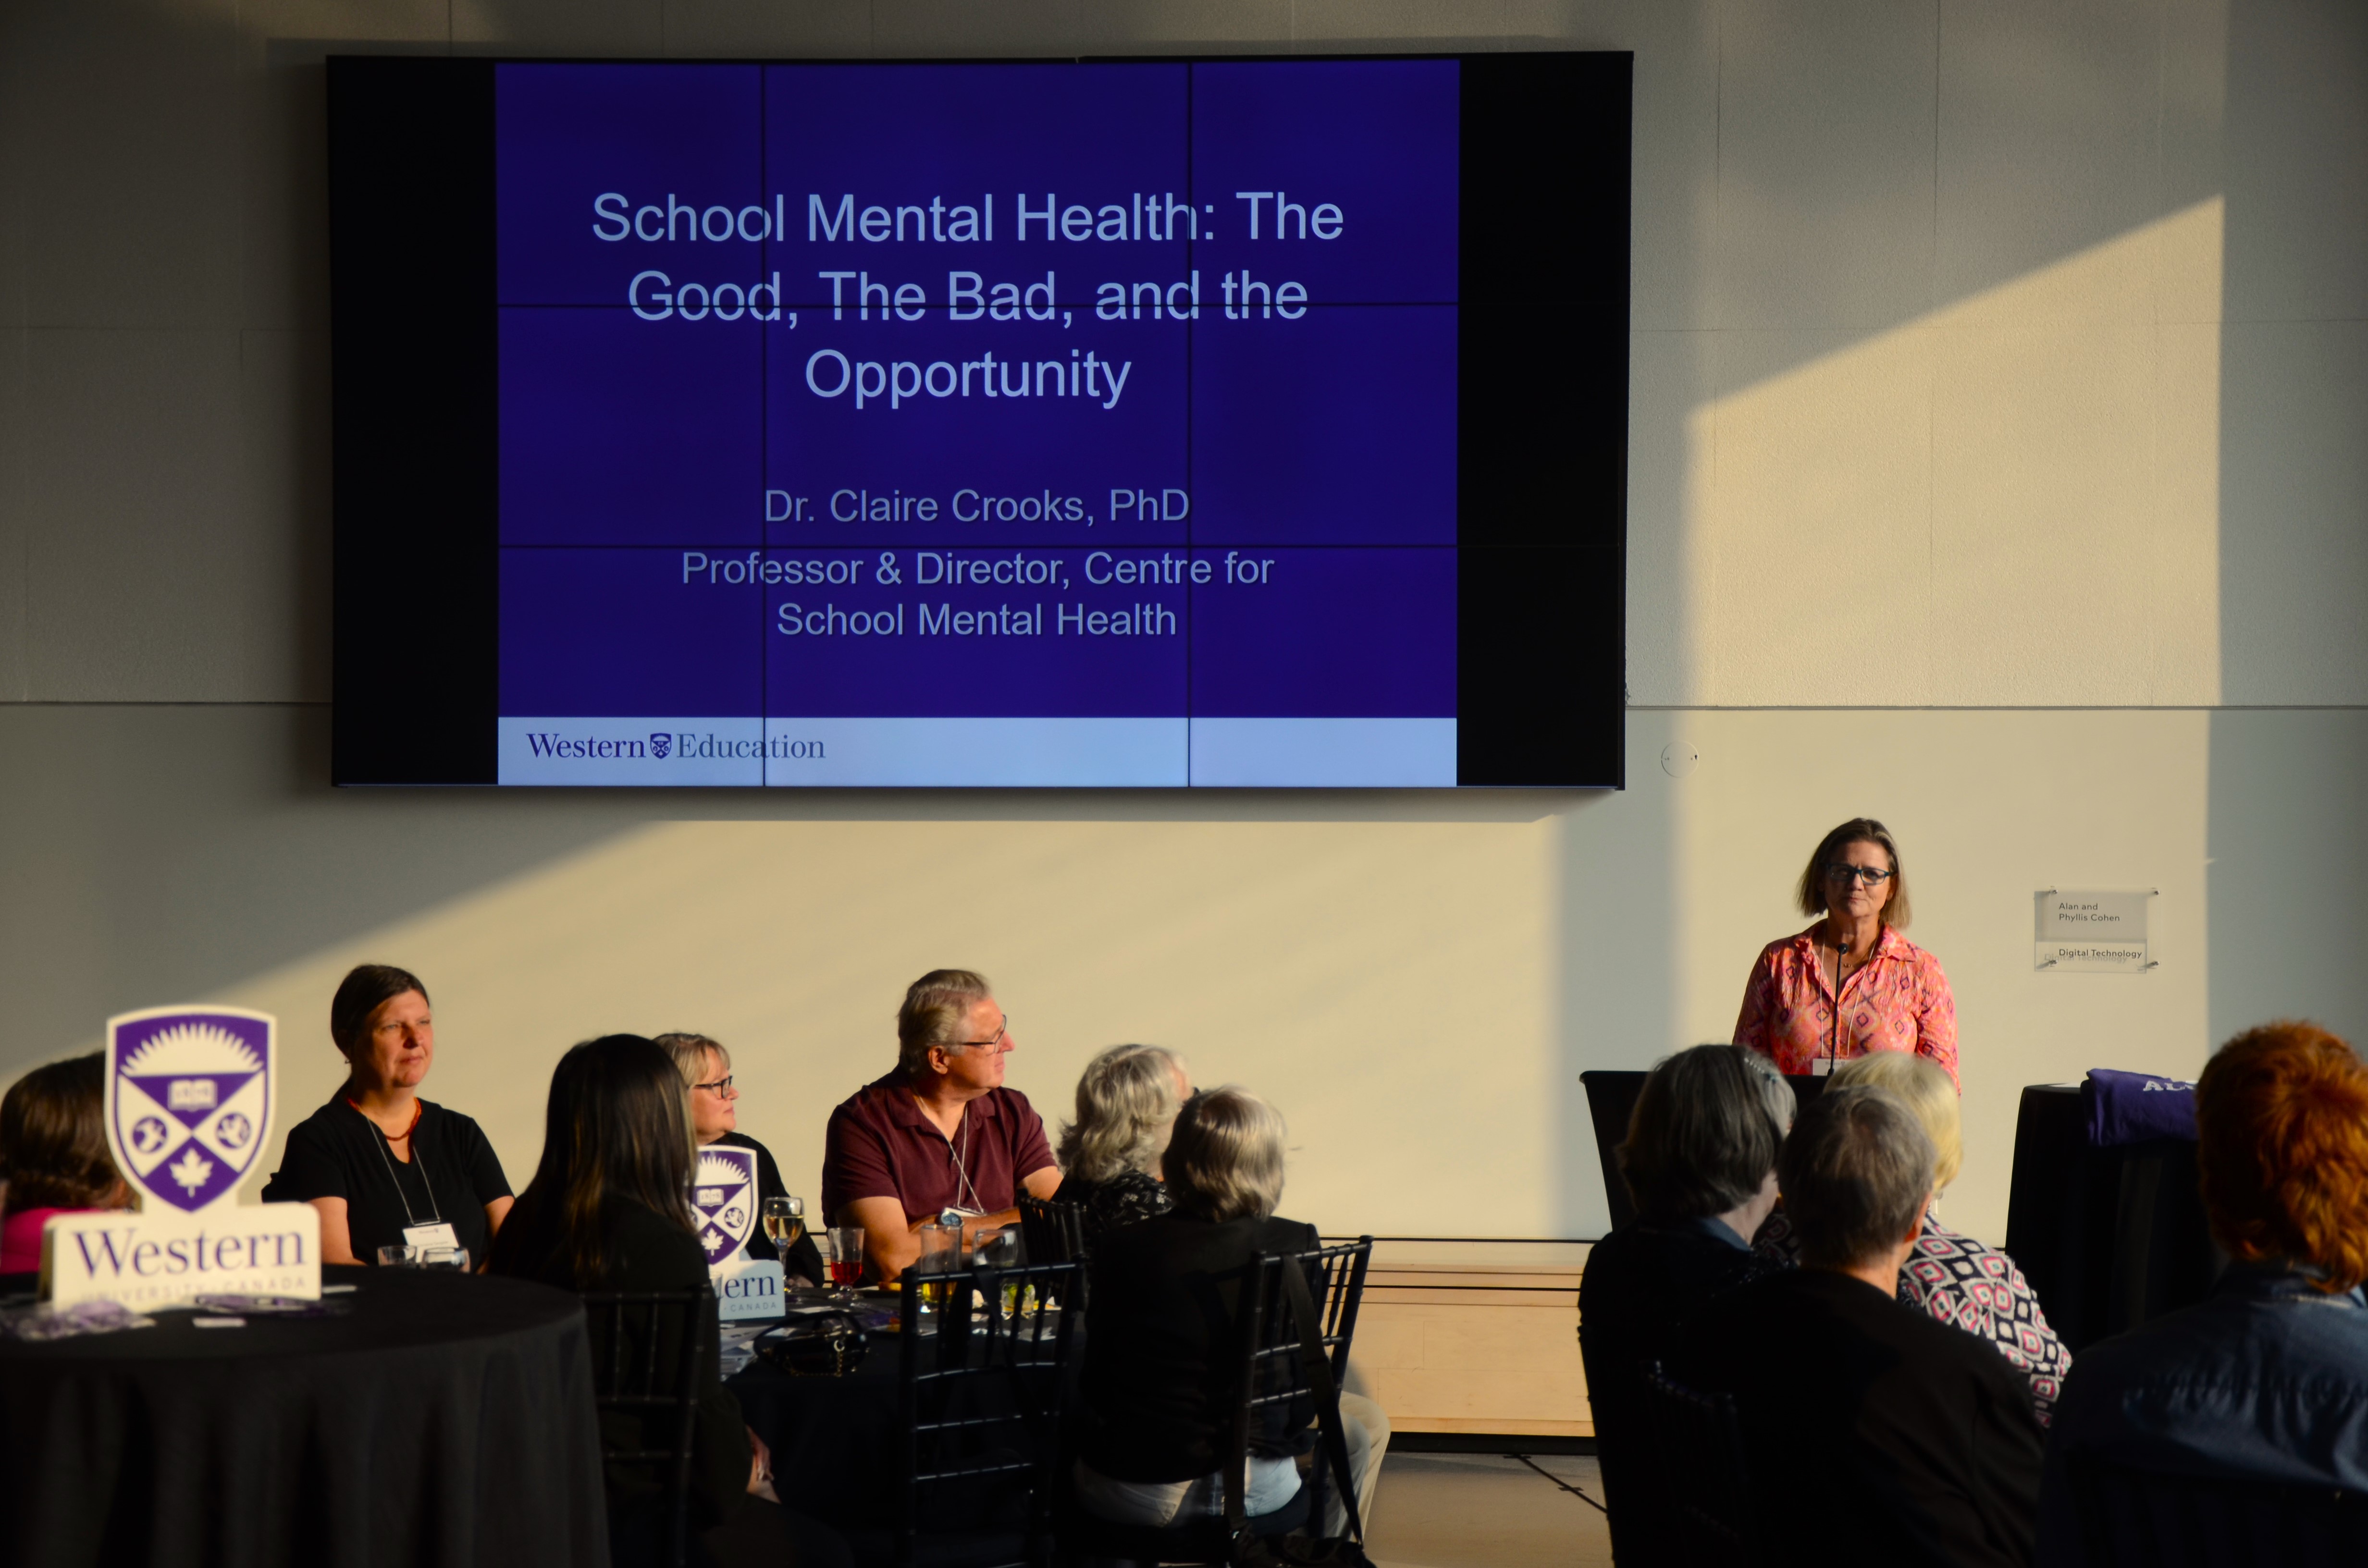 Dr. Claire Crooks delivers a keynote titled, “School Mental Health: The Good, the Bad, and the Opportunity.”